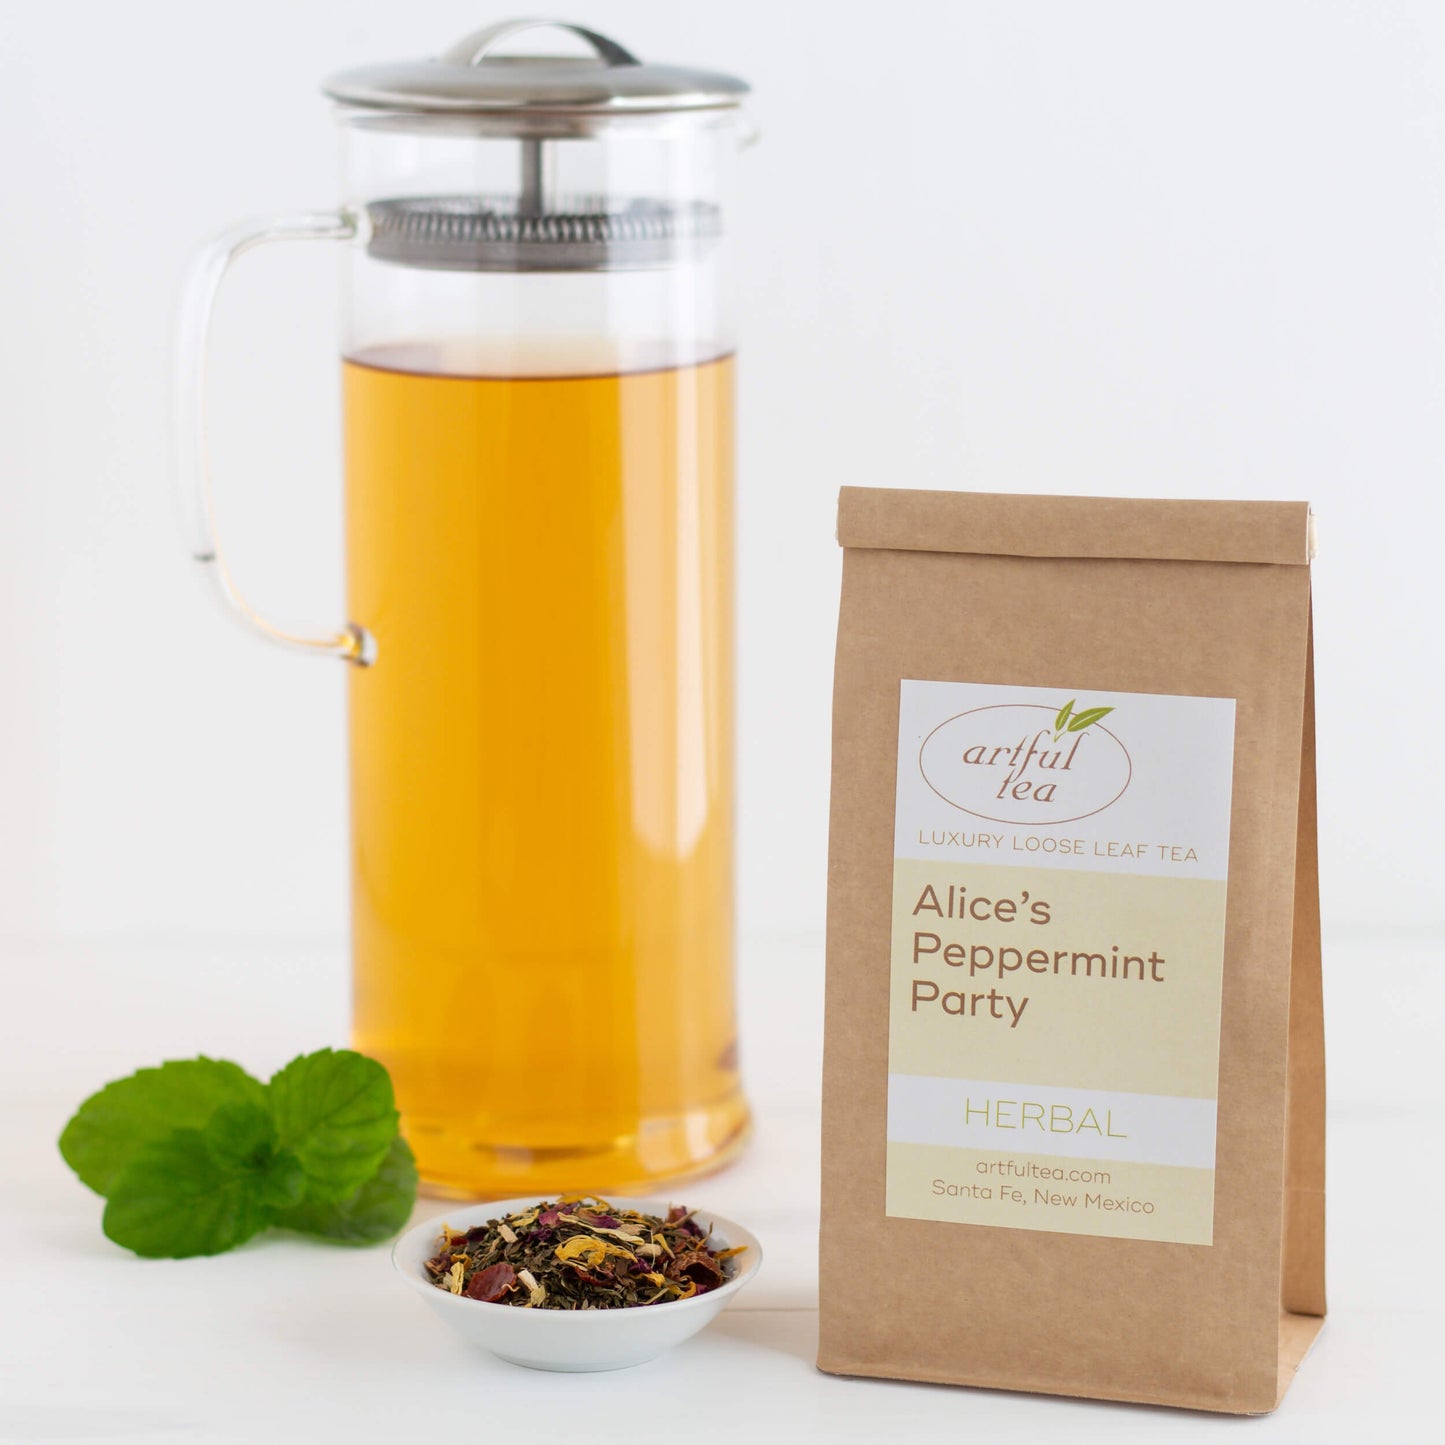 Alice's Peppermint Party Herbal Tea